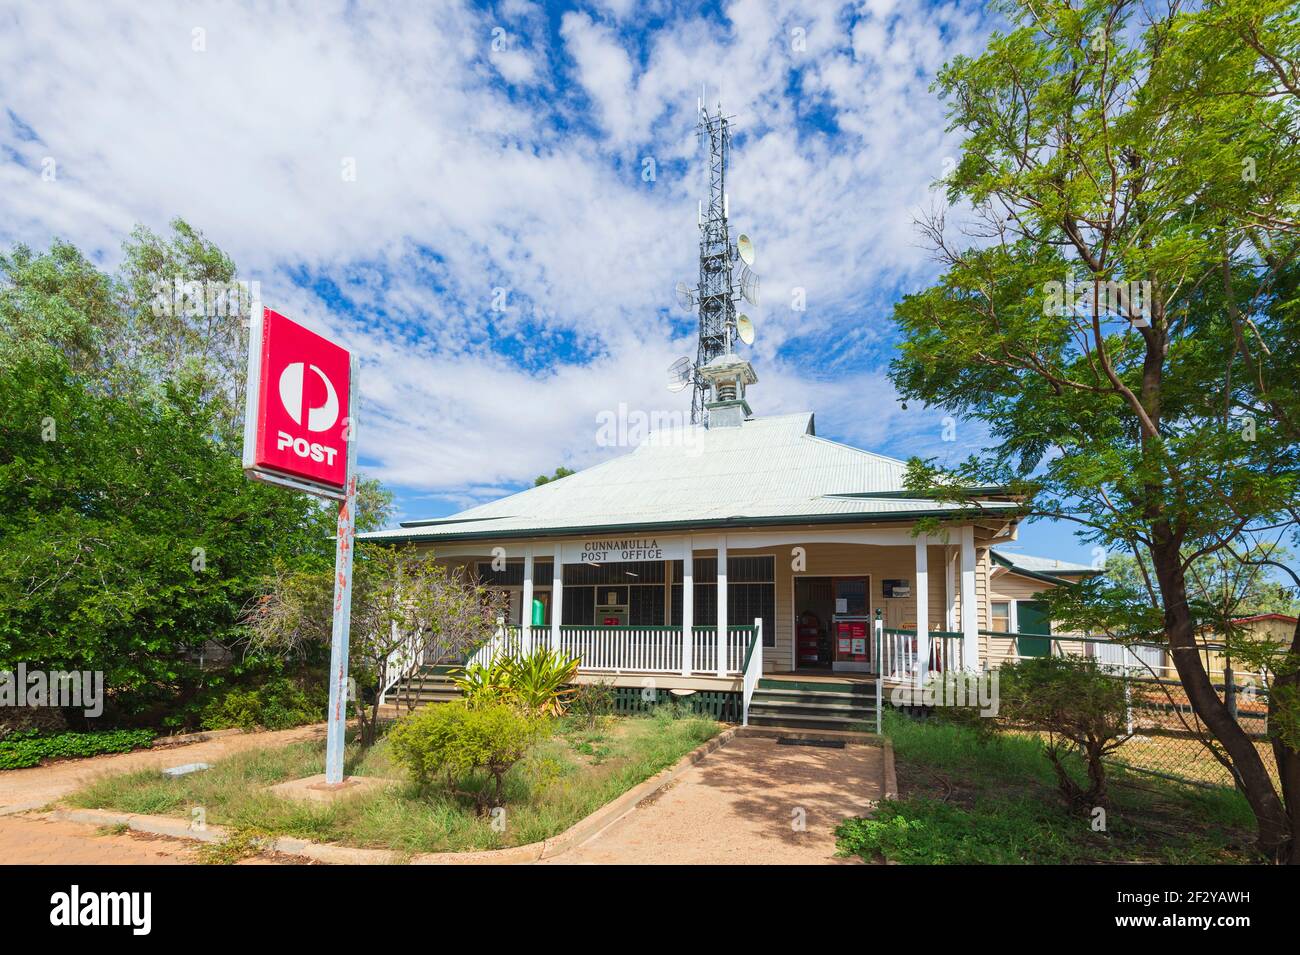 Post Office located in an old quaint Queenslander house, Cunnamulla, Queensland, QLD, Australia Stock Photo